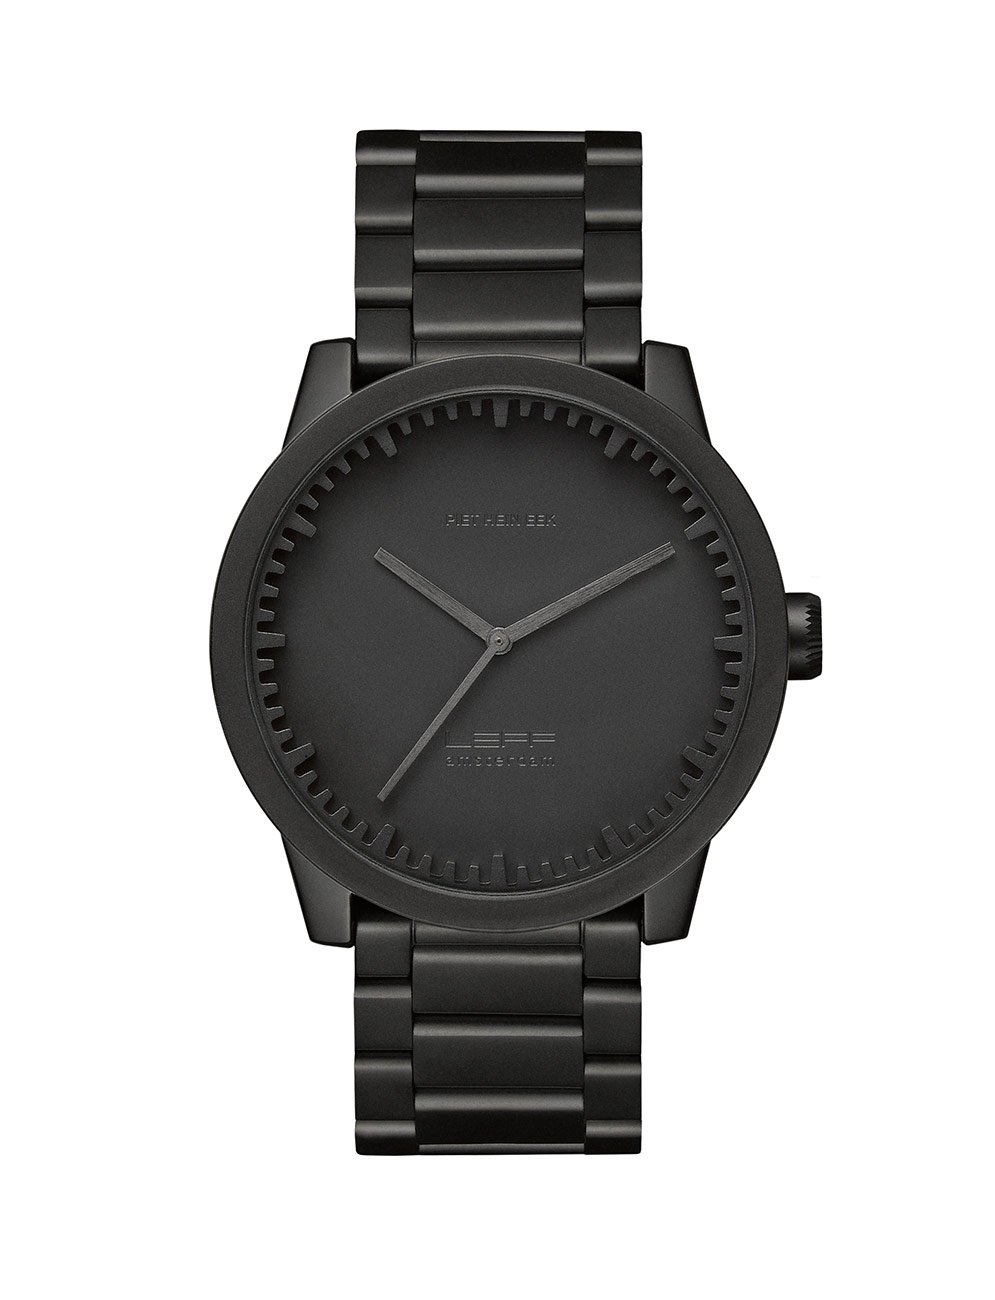 Leff Amsterdam's Tube Watches